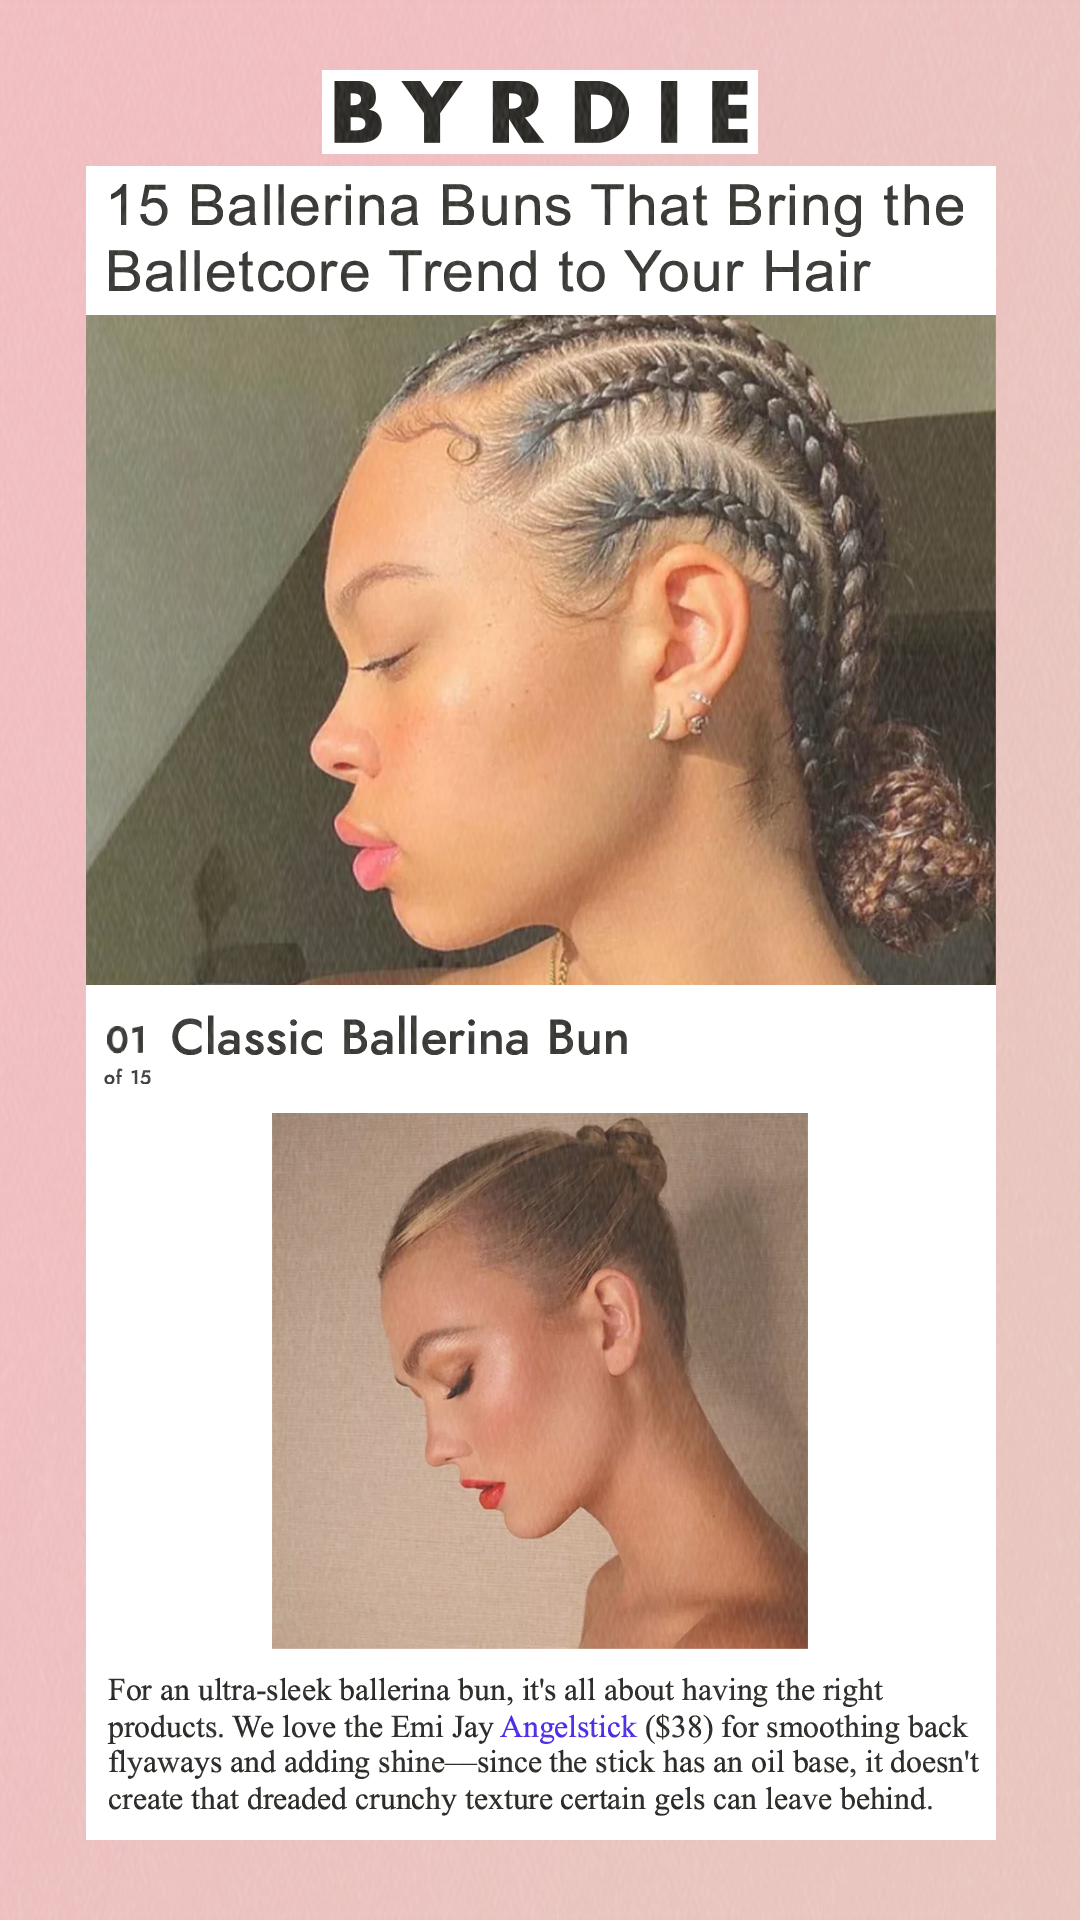 15 Ballerina Buns That Bring the Balletcore Trend to Your Hair 01 of 15Classic Ballerina BunKarlie Kloss with a slicked-back ballet bun.@harryjoshhair/InstagramFor an ultra-sleek ballerina bun, it's all about having the right products. We love the Emi Jay Angelstick ($38) for smoothing back flyaways and adding shine—since the stick has an oil base, it doesn't create that dreaded crunchy texture certain gels can leave behind.